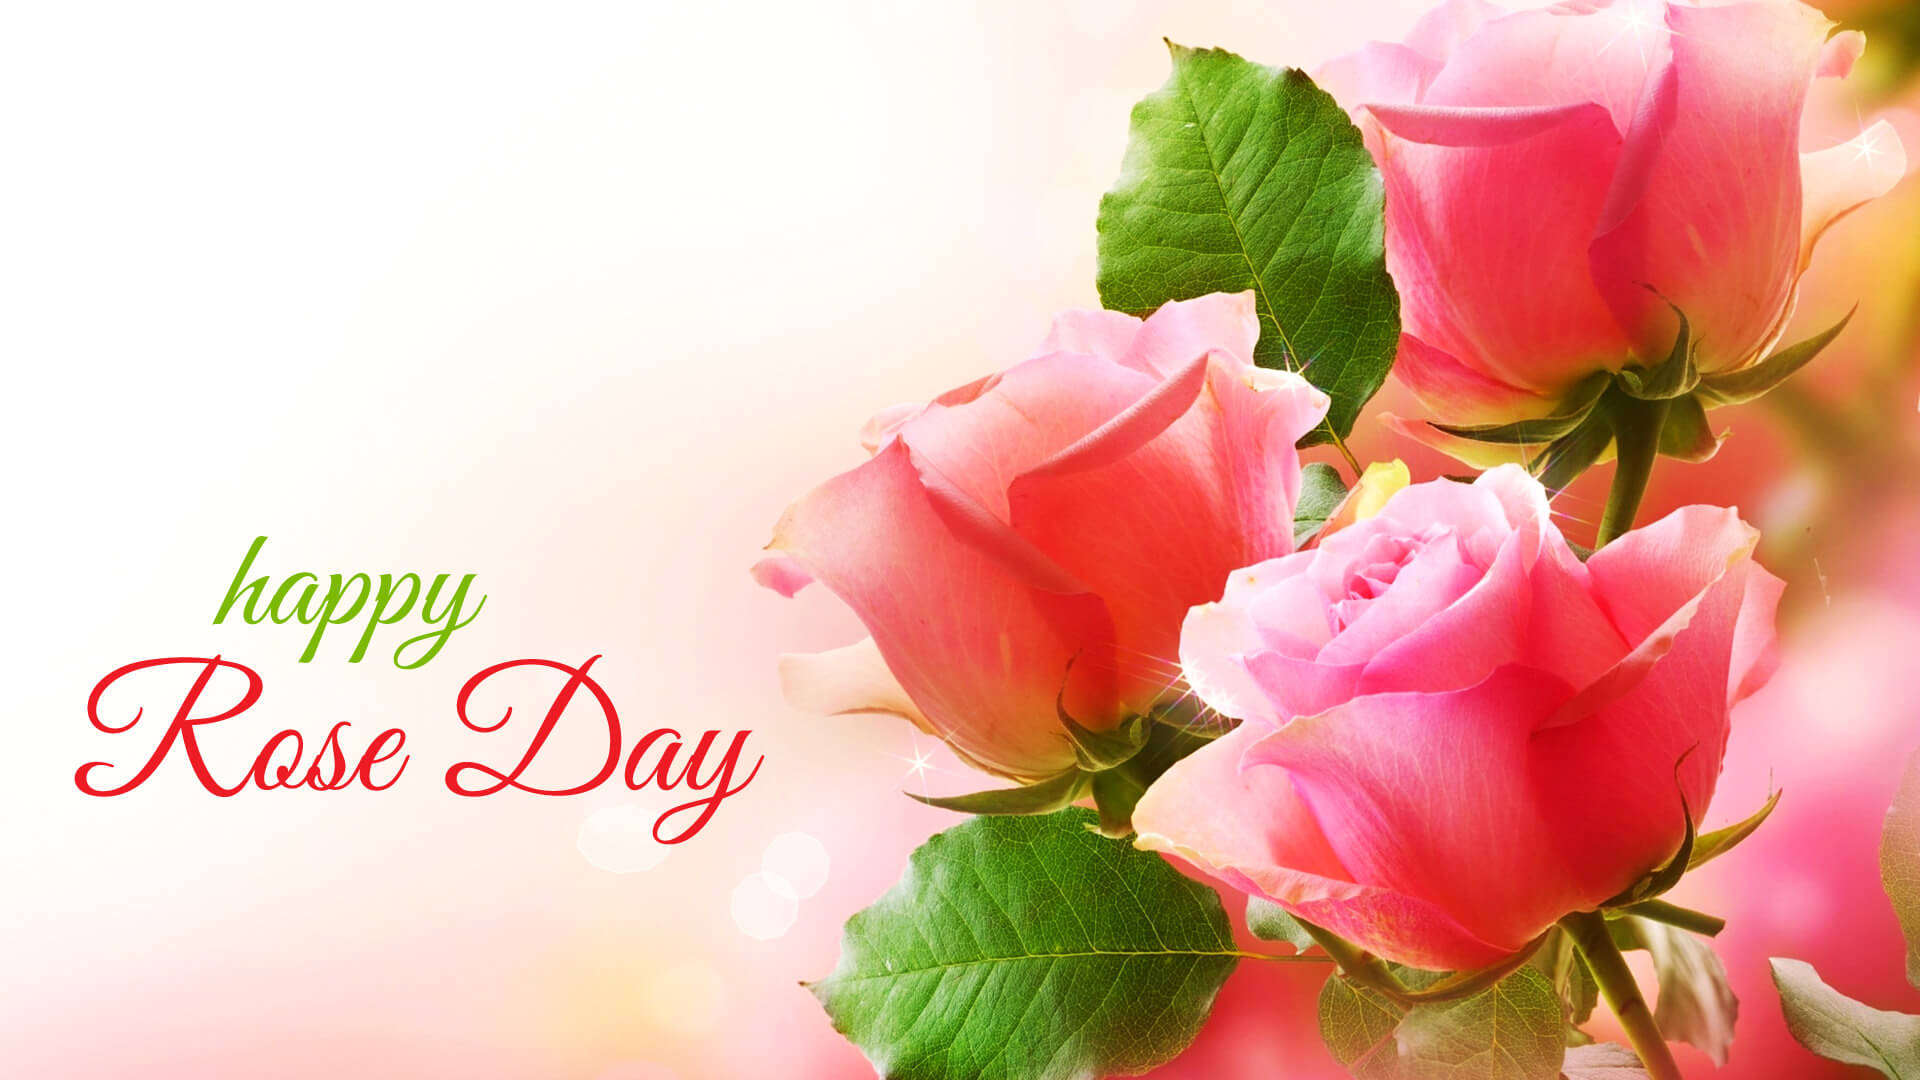 Rose Day - The First Step to Love Week – Messages and Quotes